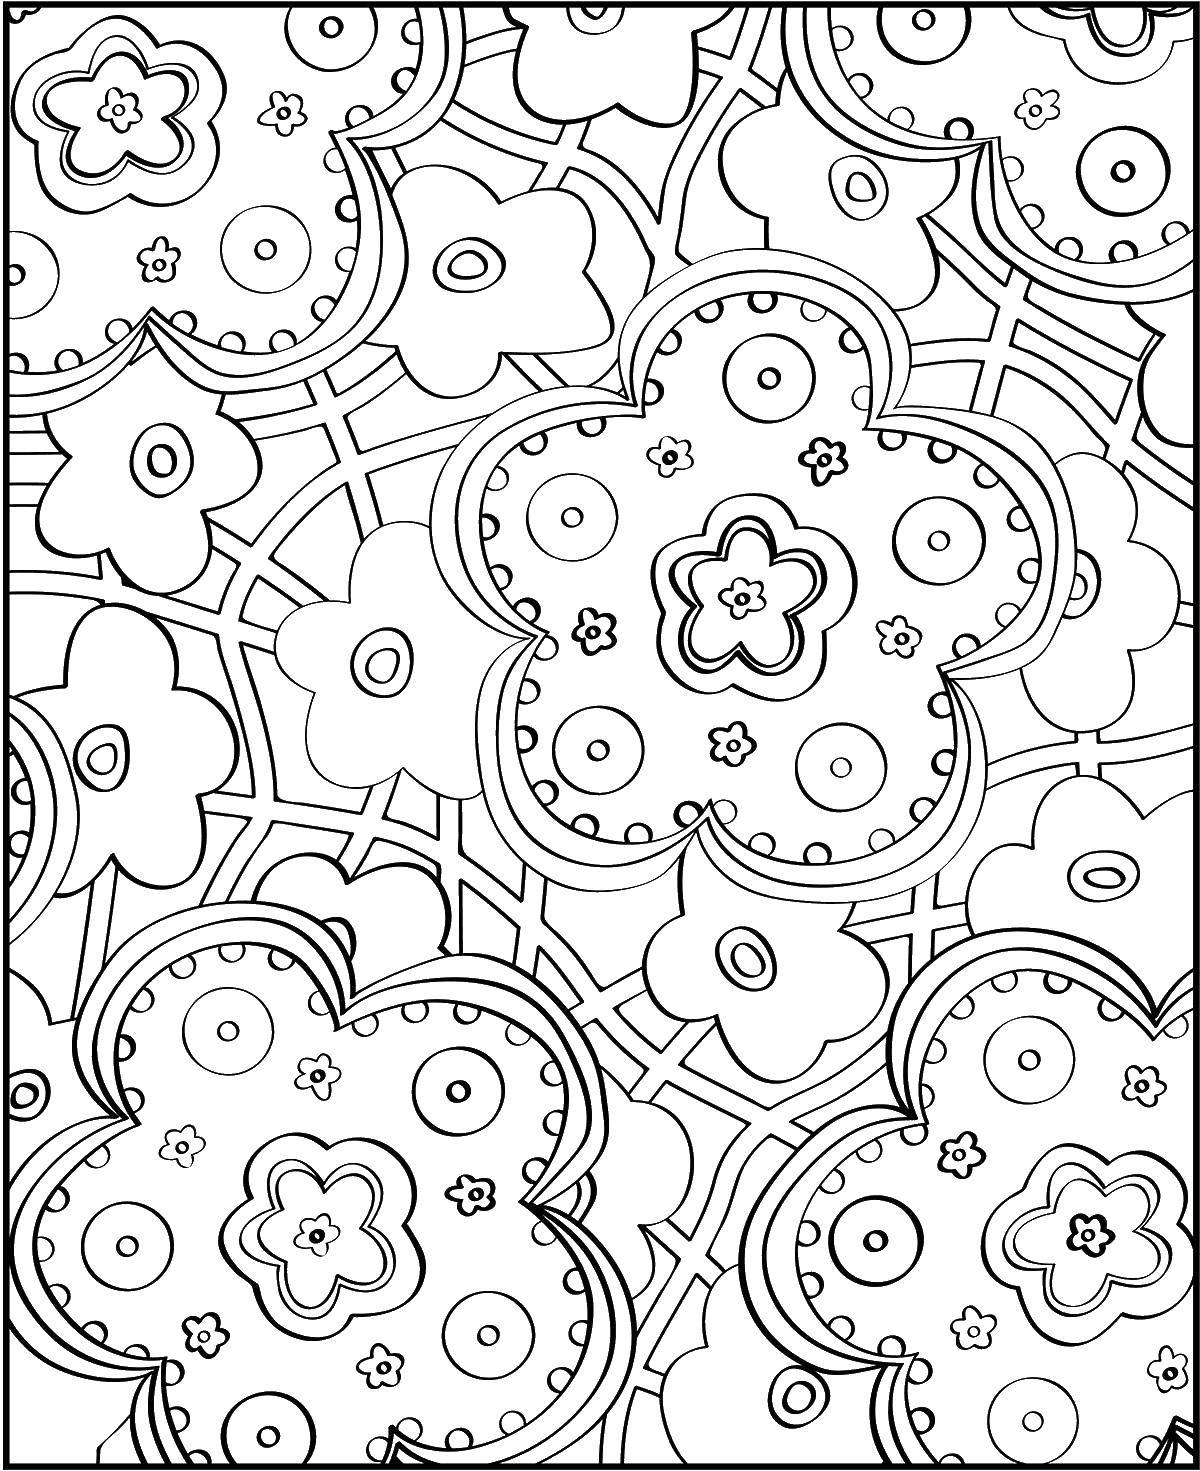 Coloring Floral uzorchiki.. Category patterns. Tags:  Patterns, flower.